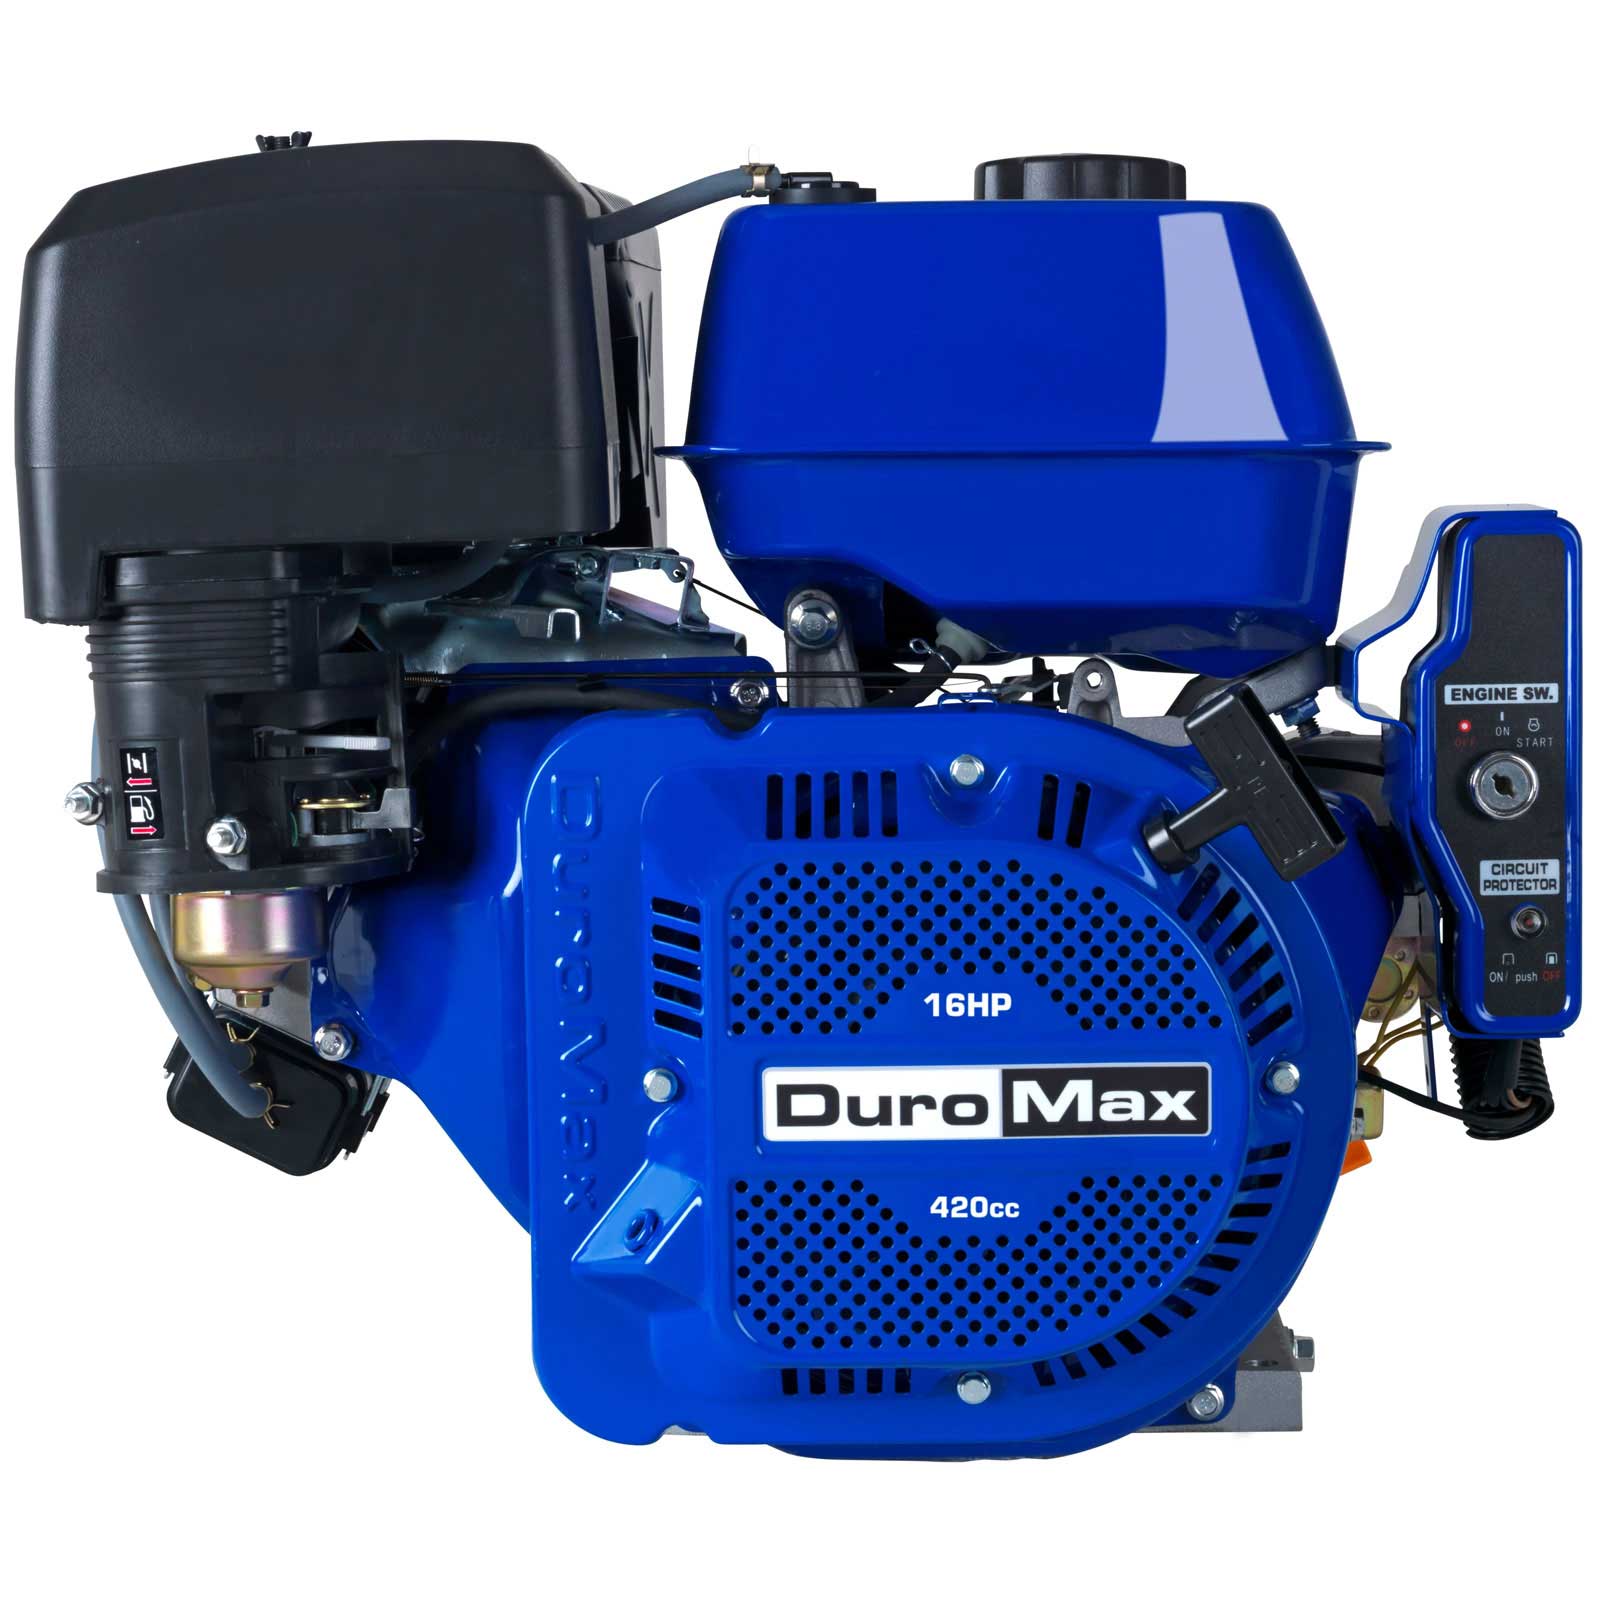 DuroMax XP16HPE 16HP Gas Multi Purpose Horizontal Shaft Recoil or Electric Start Engine with Key switch Box